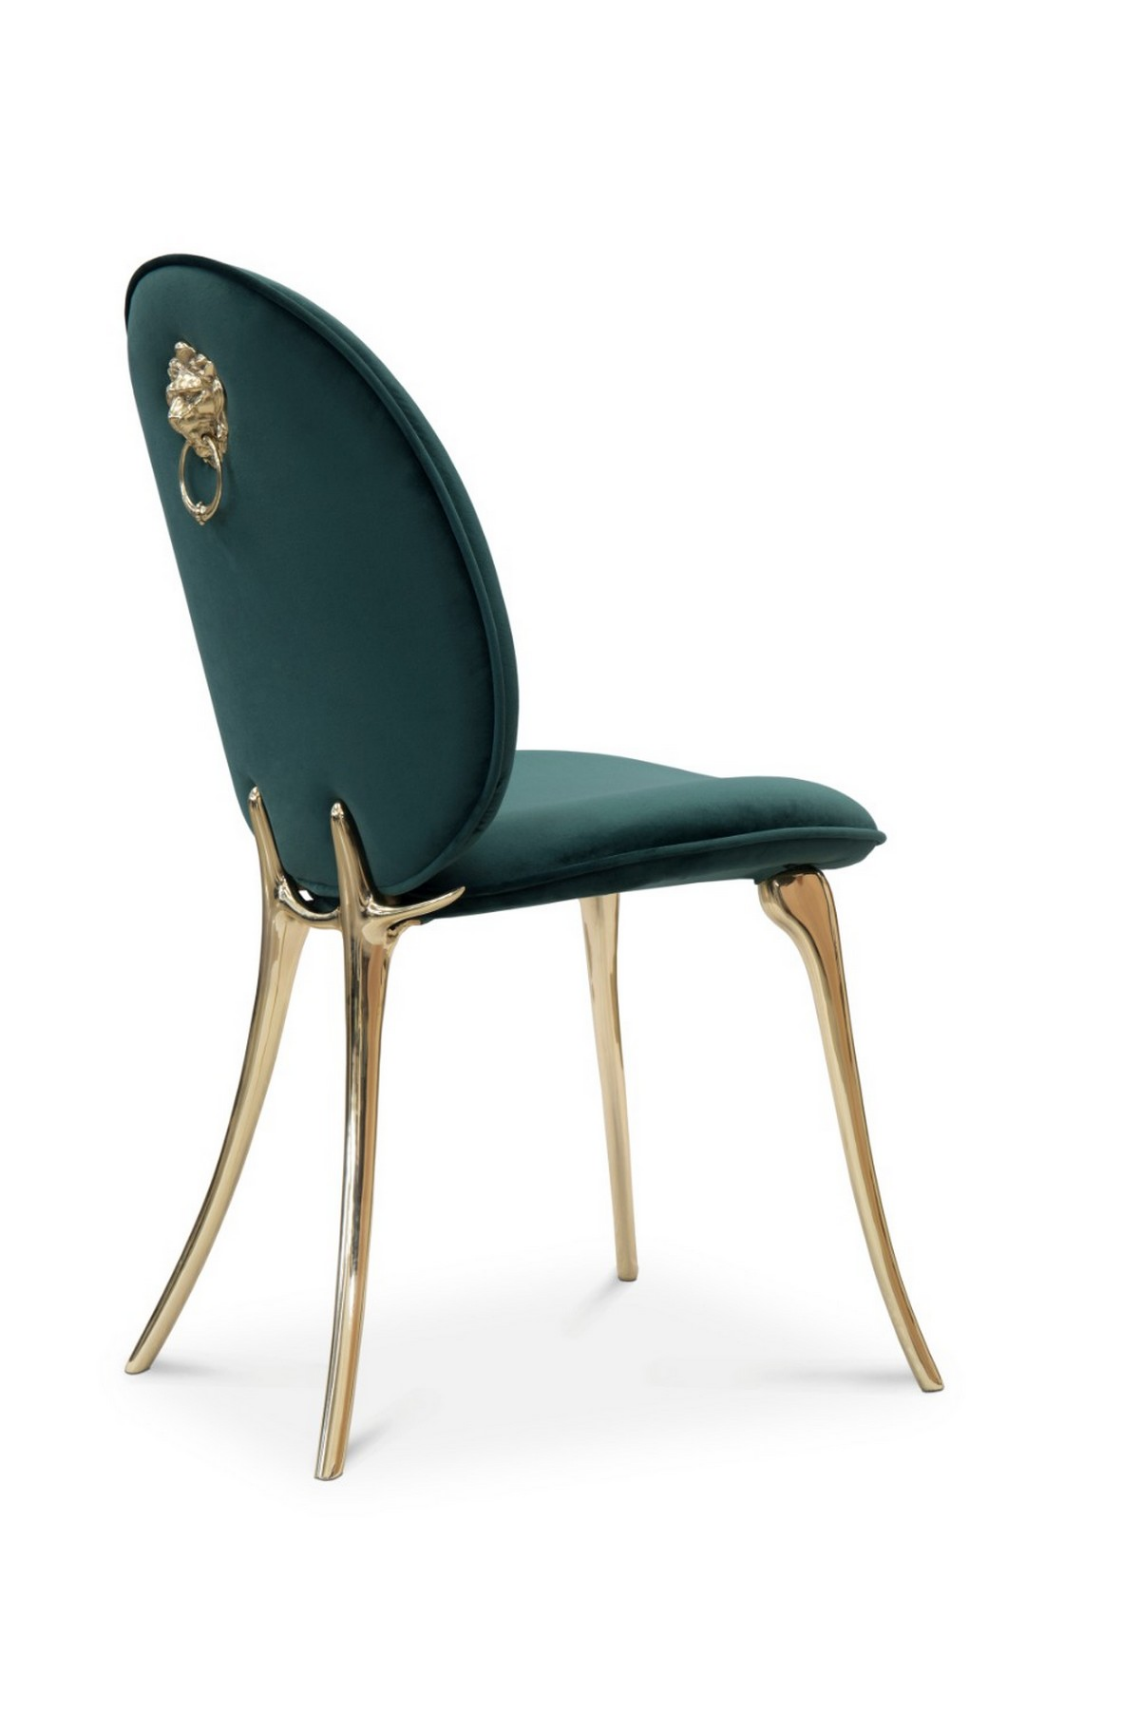 10 Dining Chair Ideas To Inspire You